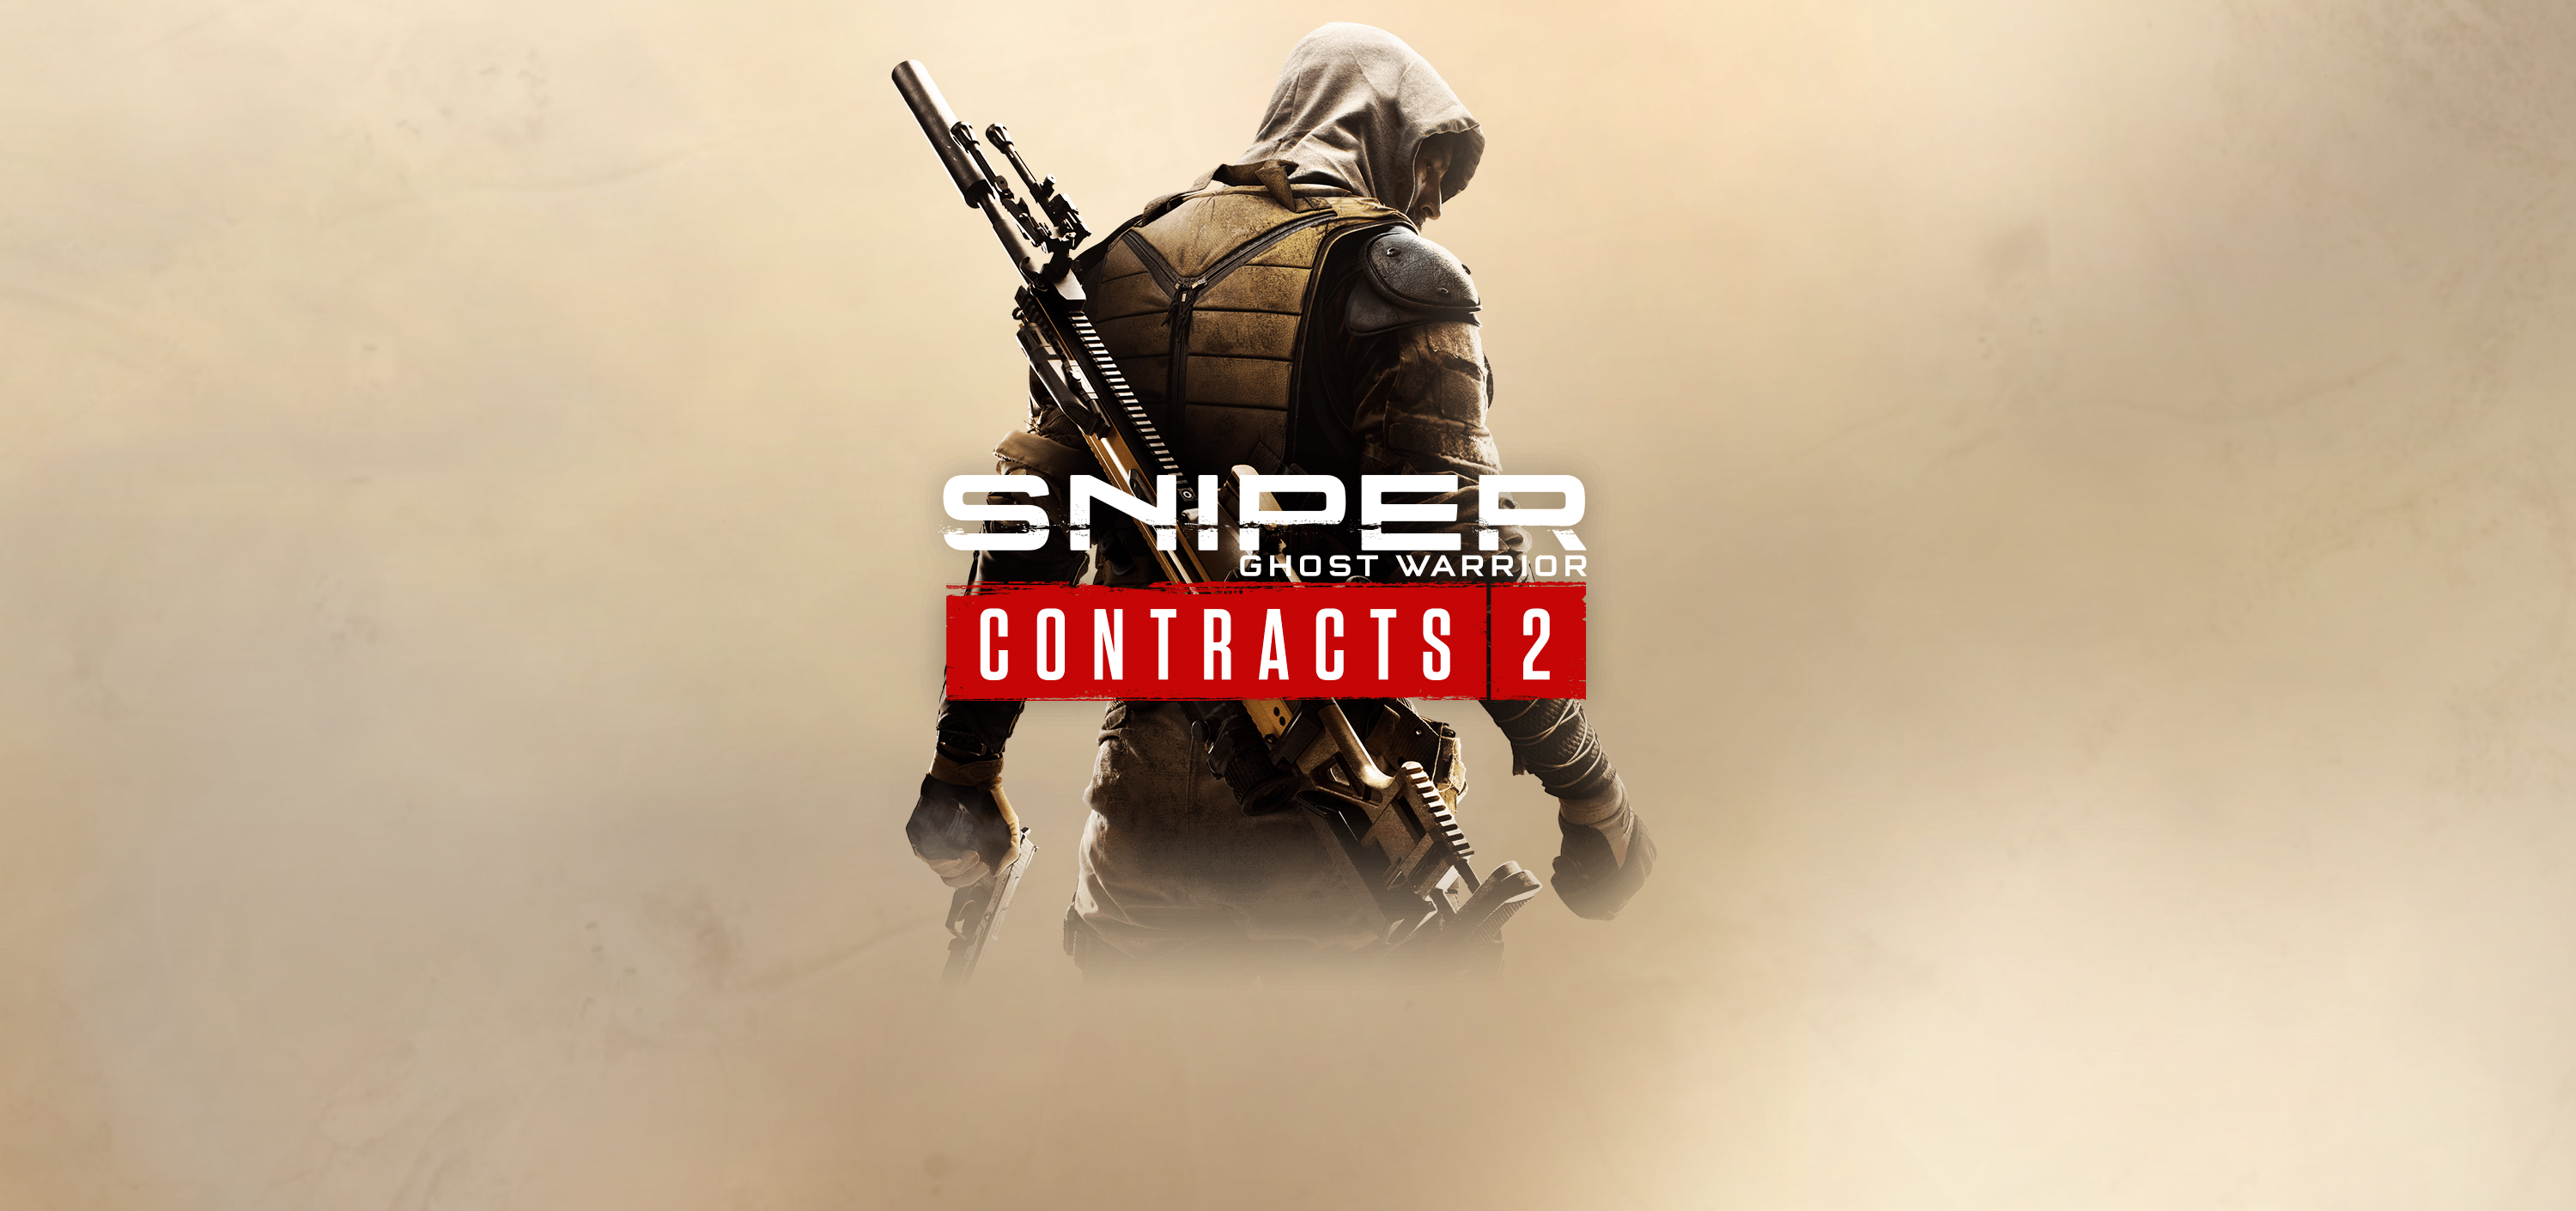 Video Game Sniper Ghost Warrior Contracts 2 3000x1410